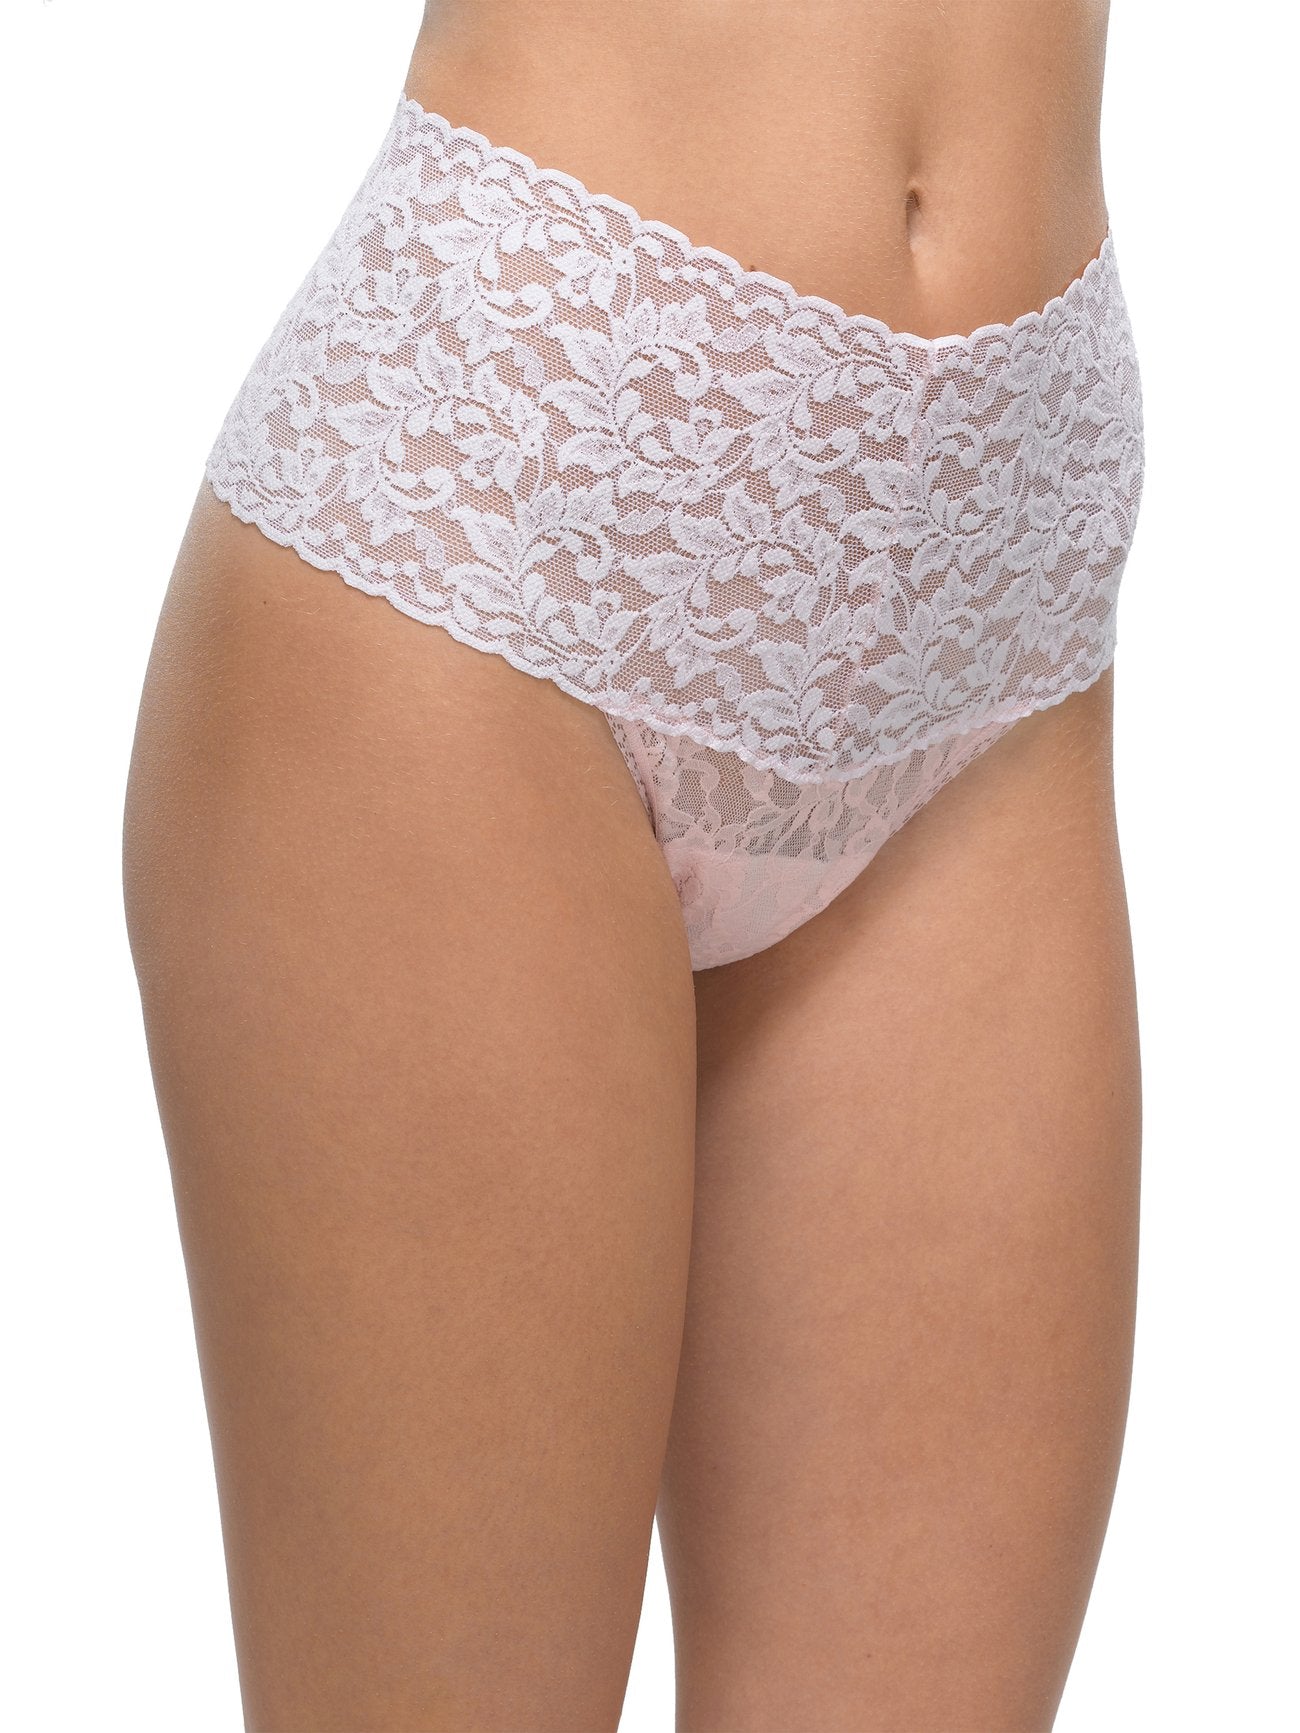 Retro Lace Thong - Bliss Pink